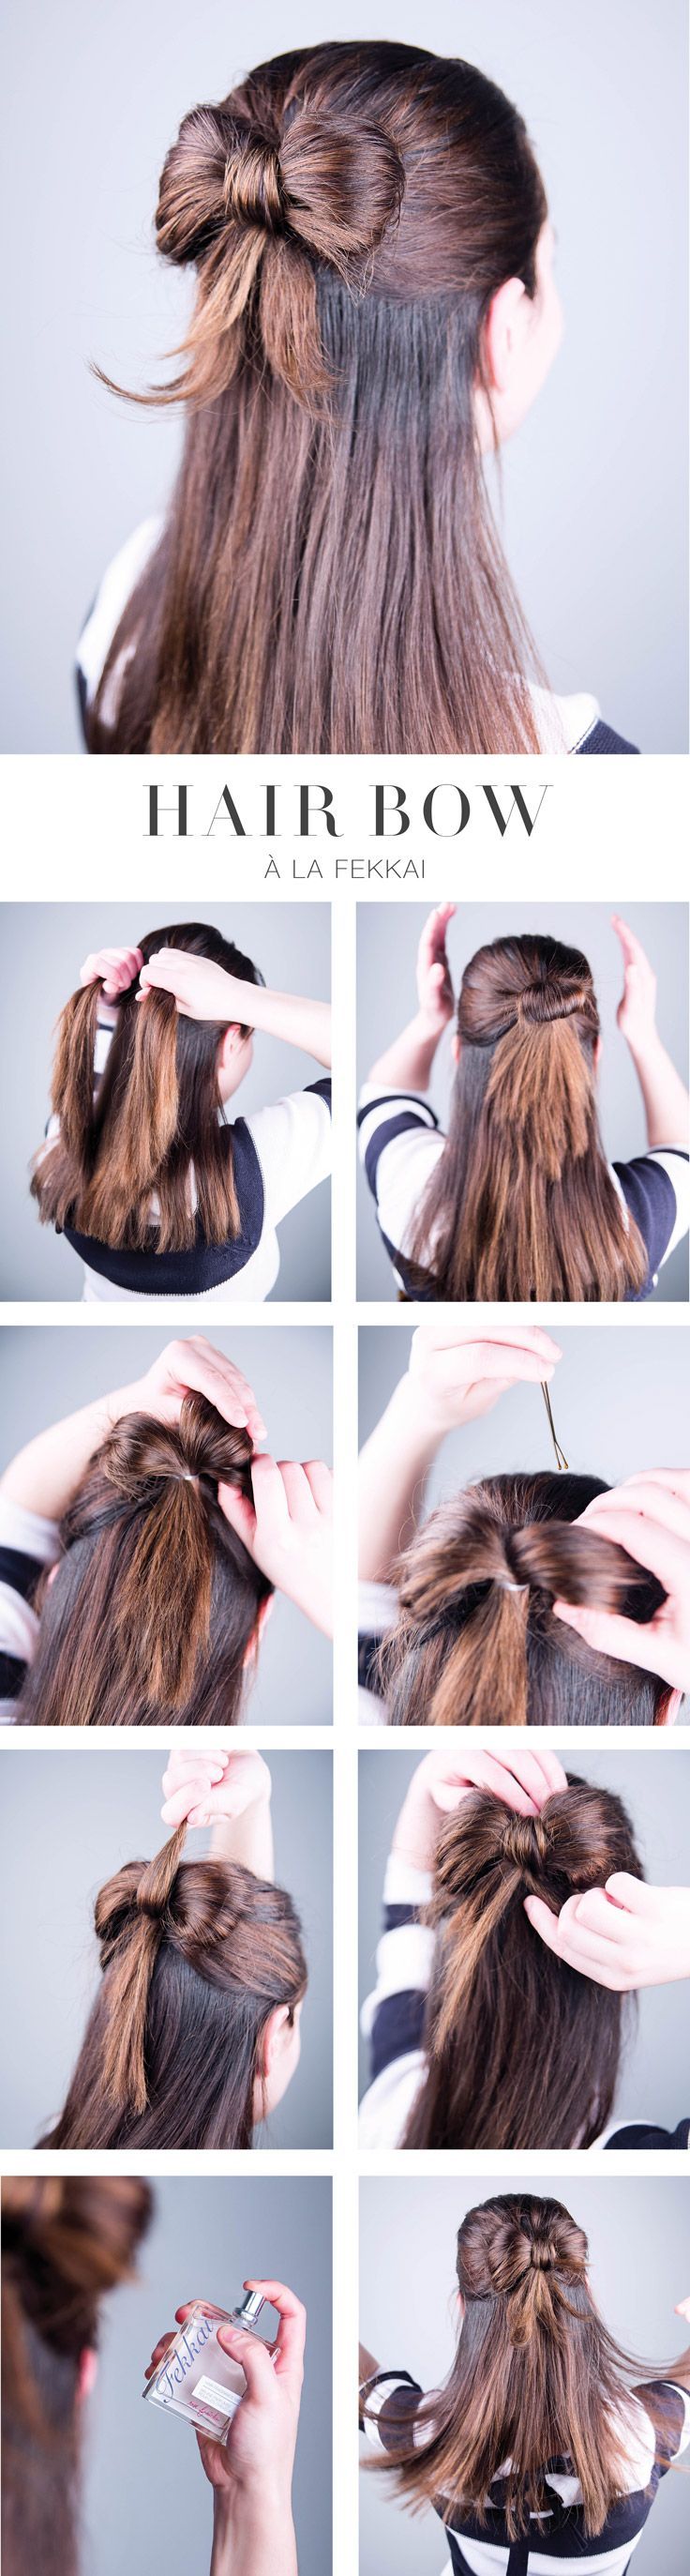 Hair Bow How To: 1. Grab an even section of hair just above your ears. 2. Secure w